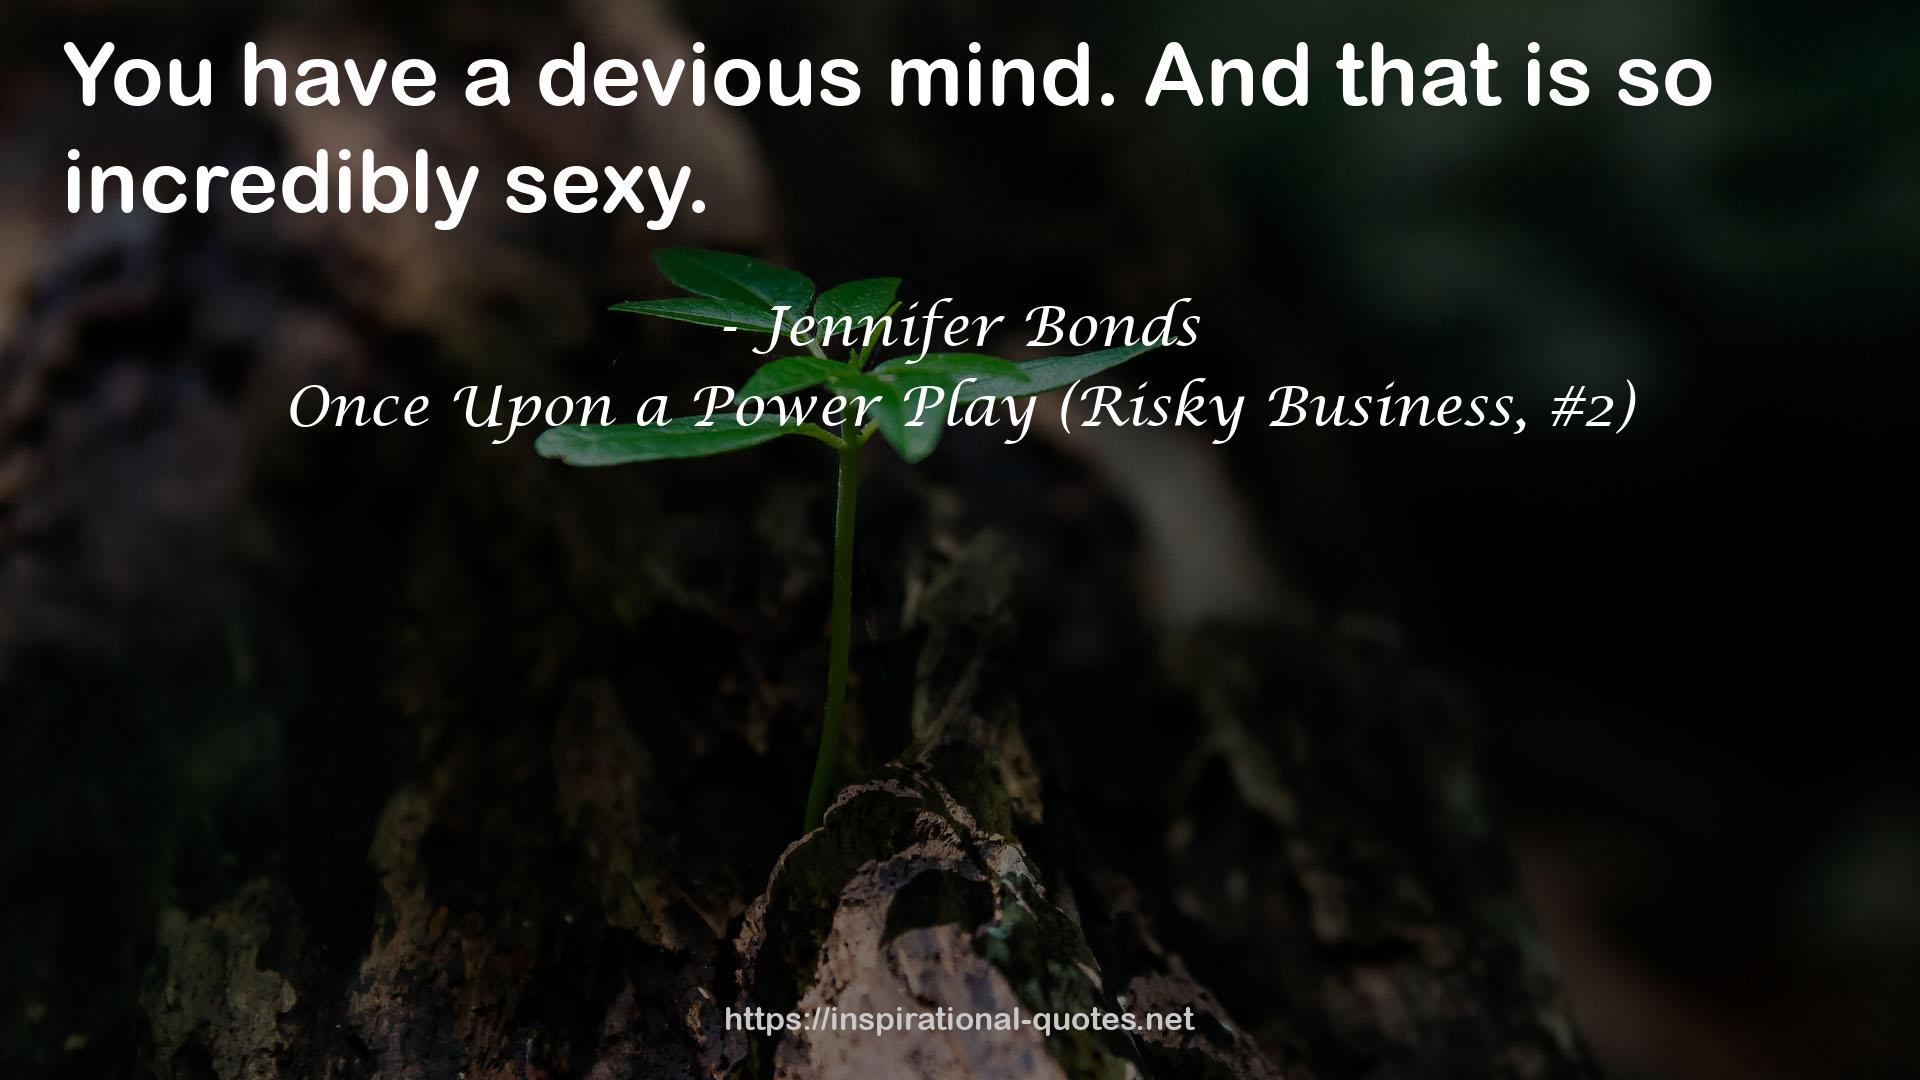 Once Upon a Power Play (Risky Business, #2) QUOTES